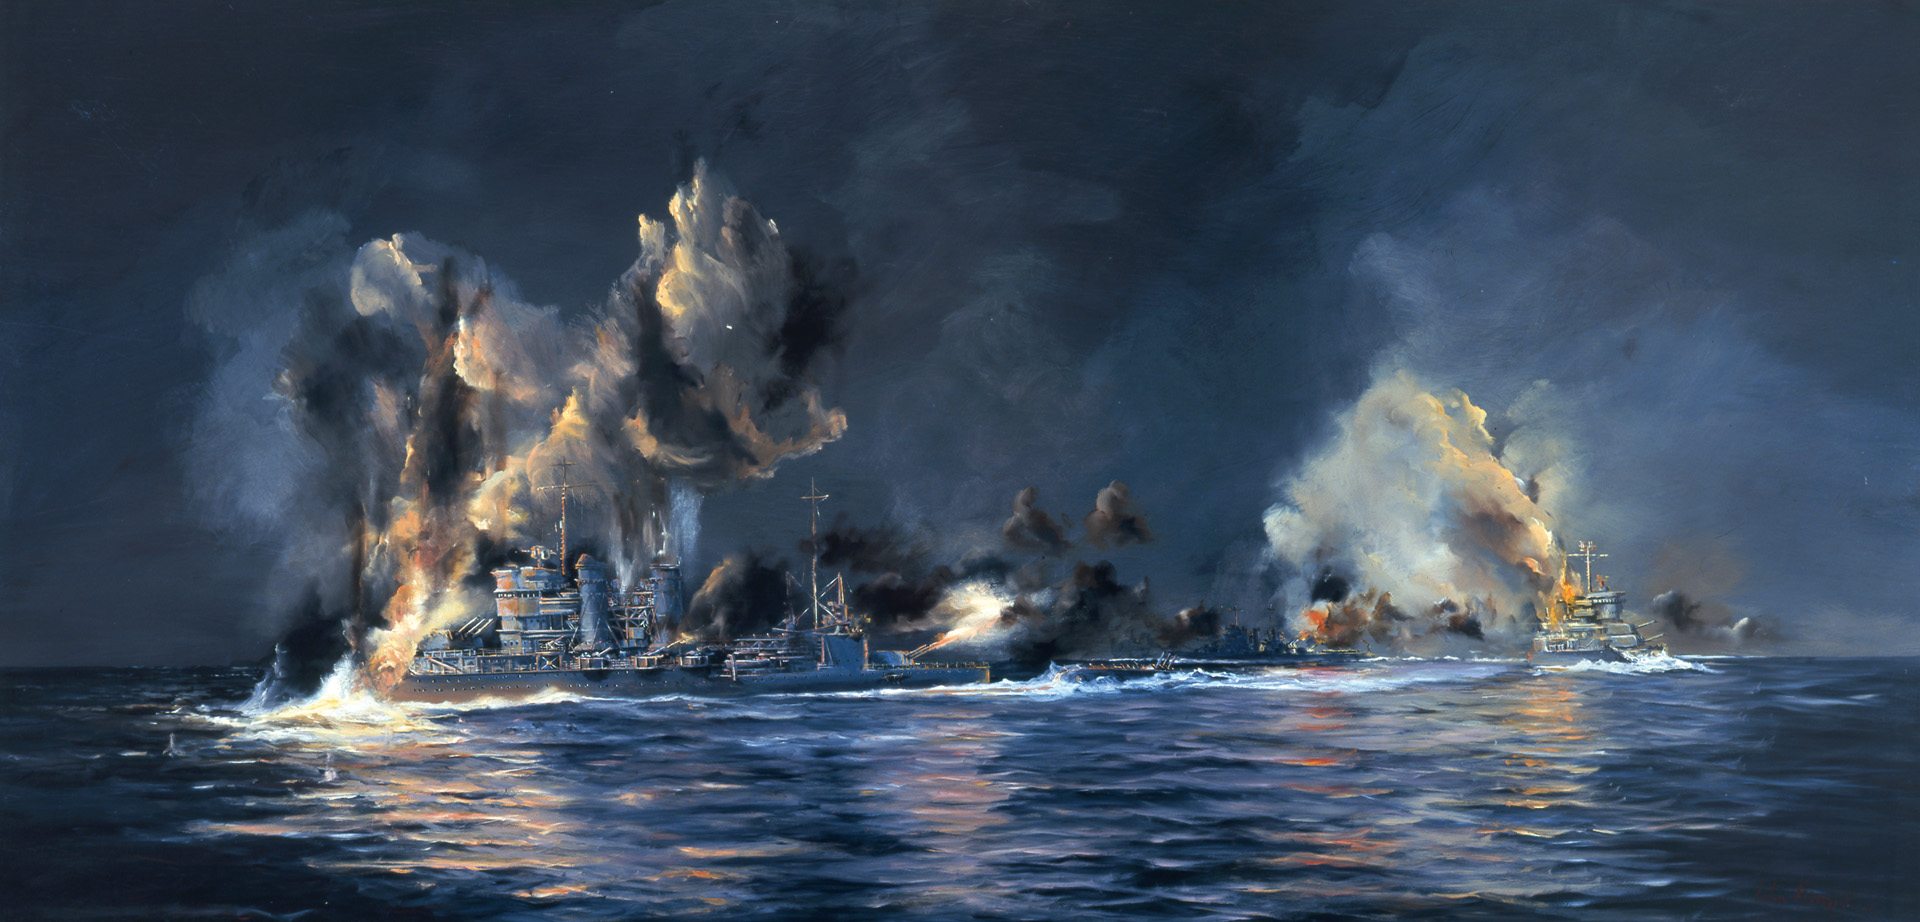 Ships explode during a heavy exchange of gunfire at the Battle of Tassafaronga, November 30, 1942. The U.S. Navy was successful at interdicting Japan’s attempts to resupply her troops on Guadalcanal, thus forcing the evacuation. 